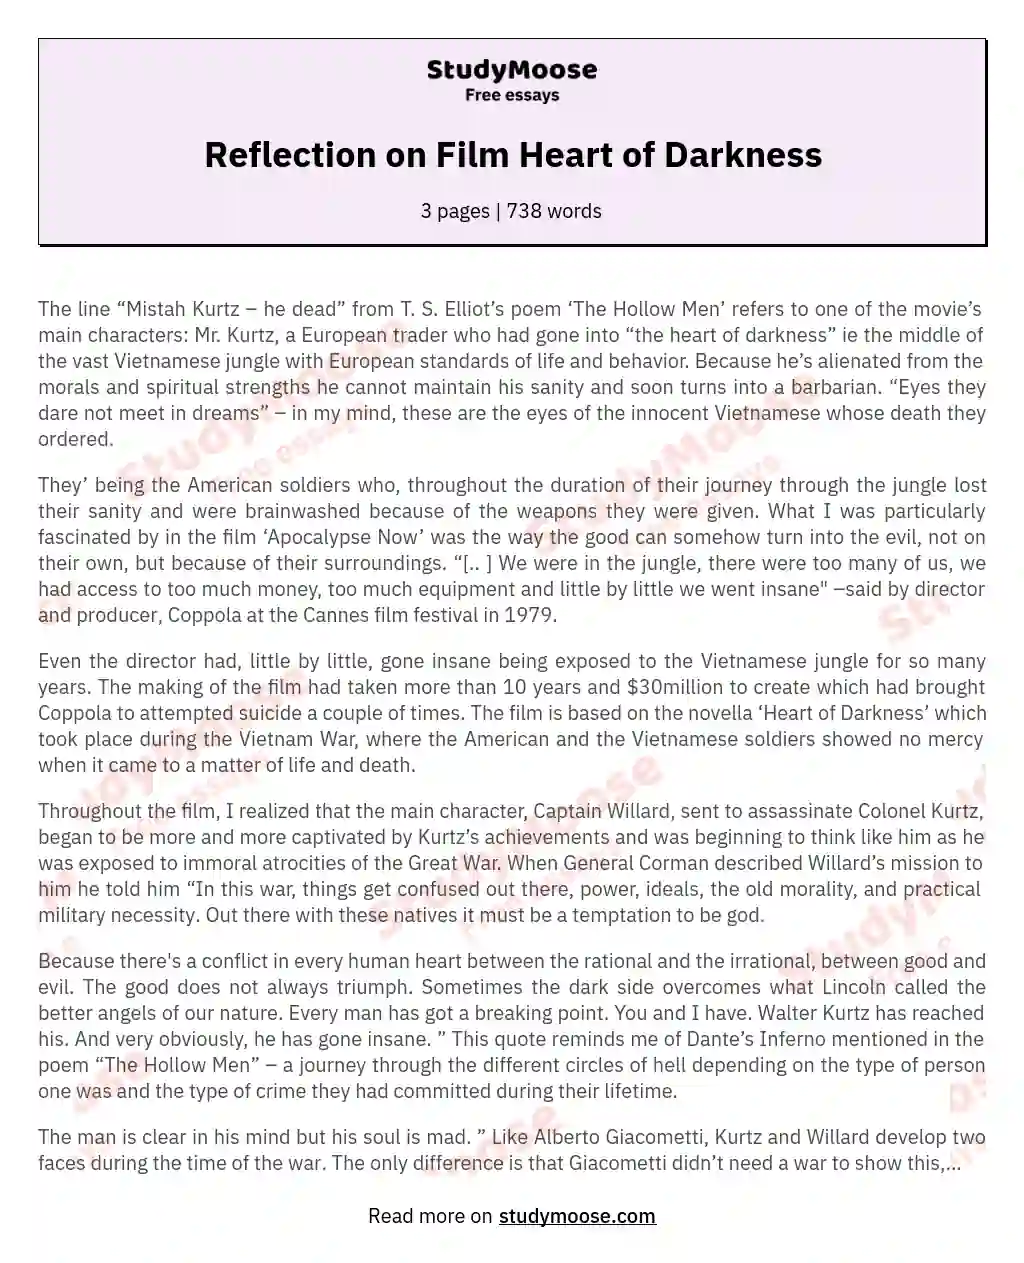 Reflection on Film Heart of Darkness essay